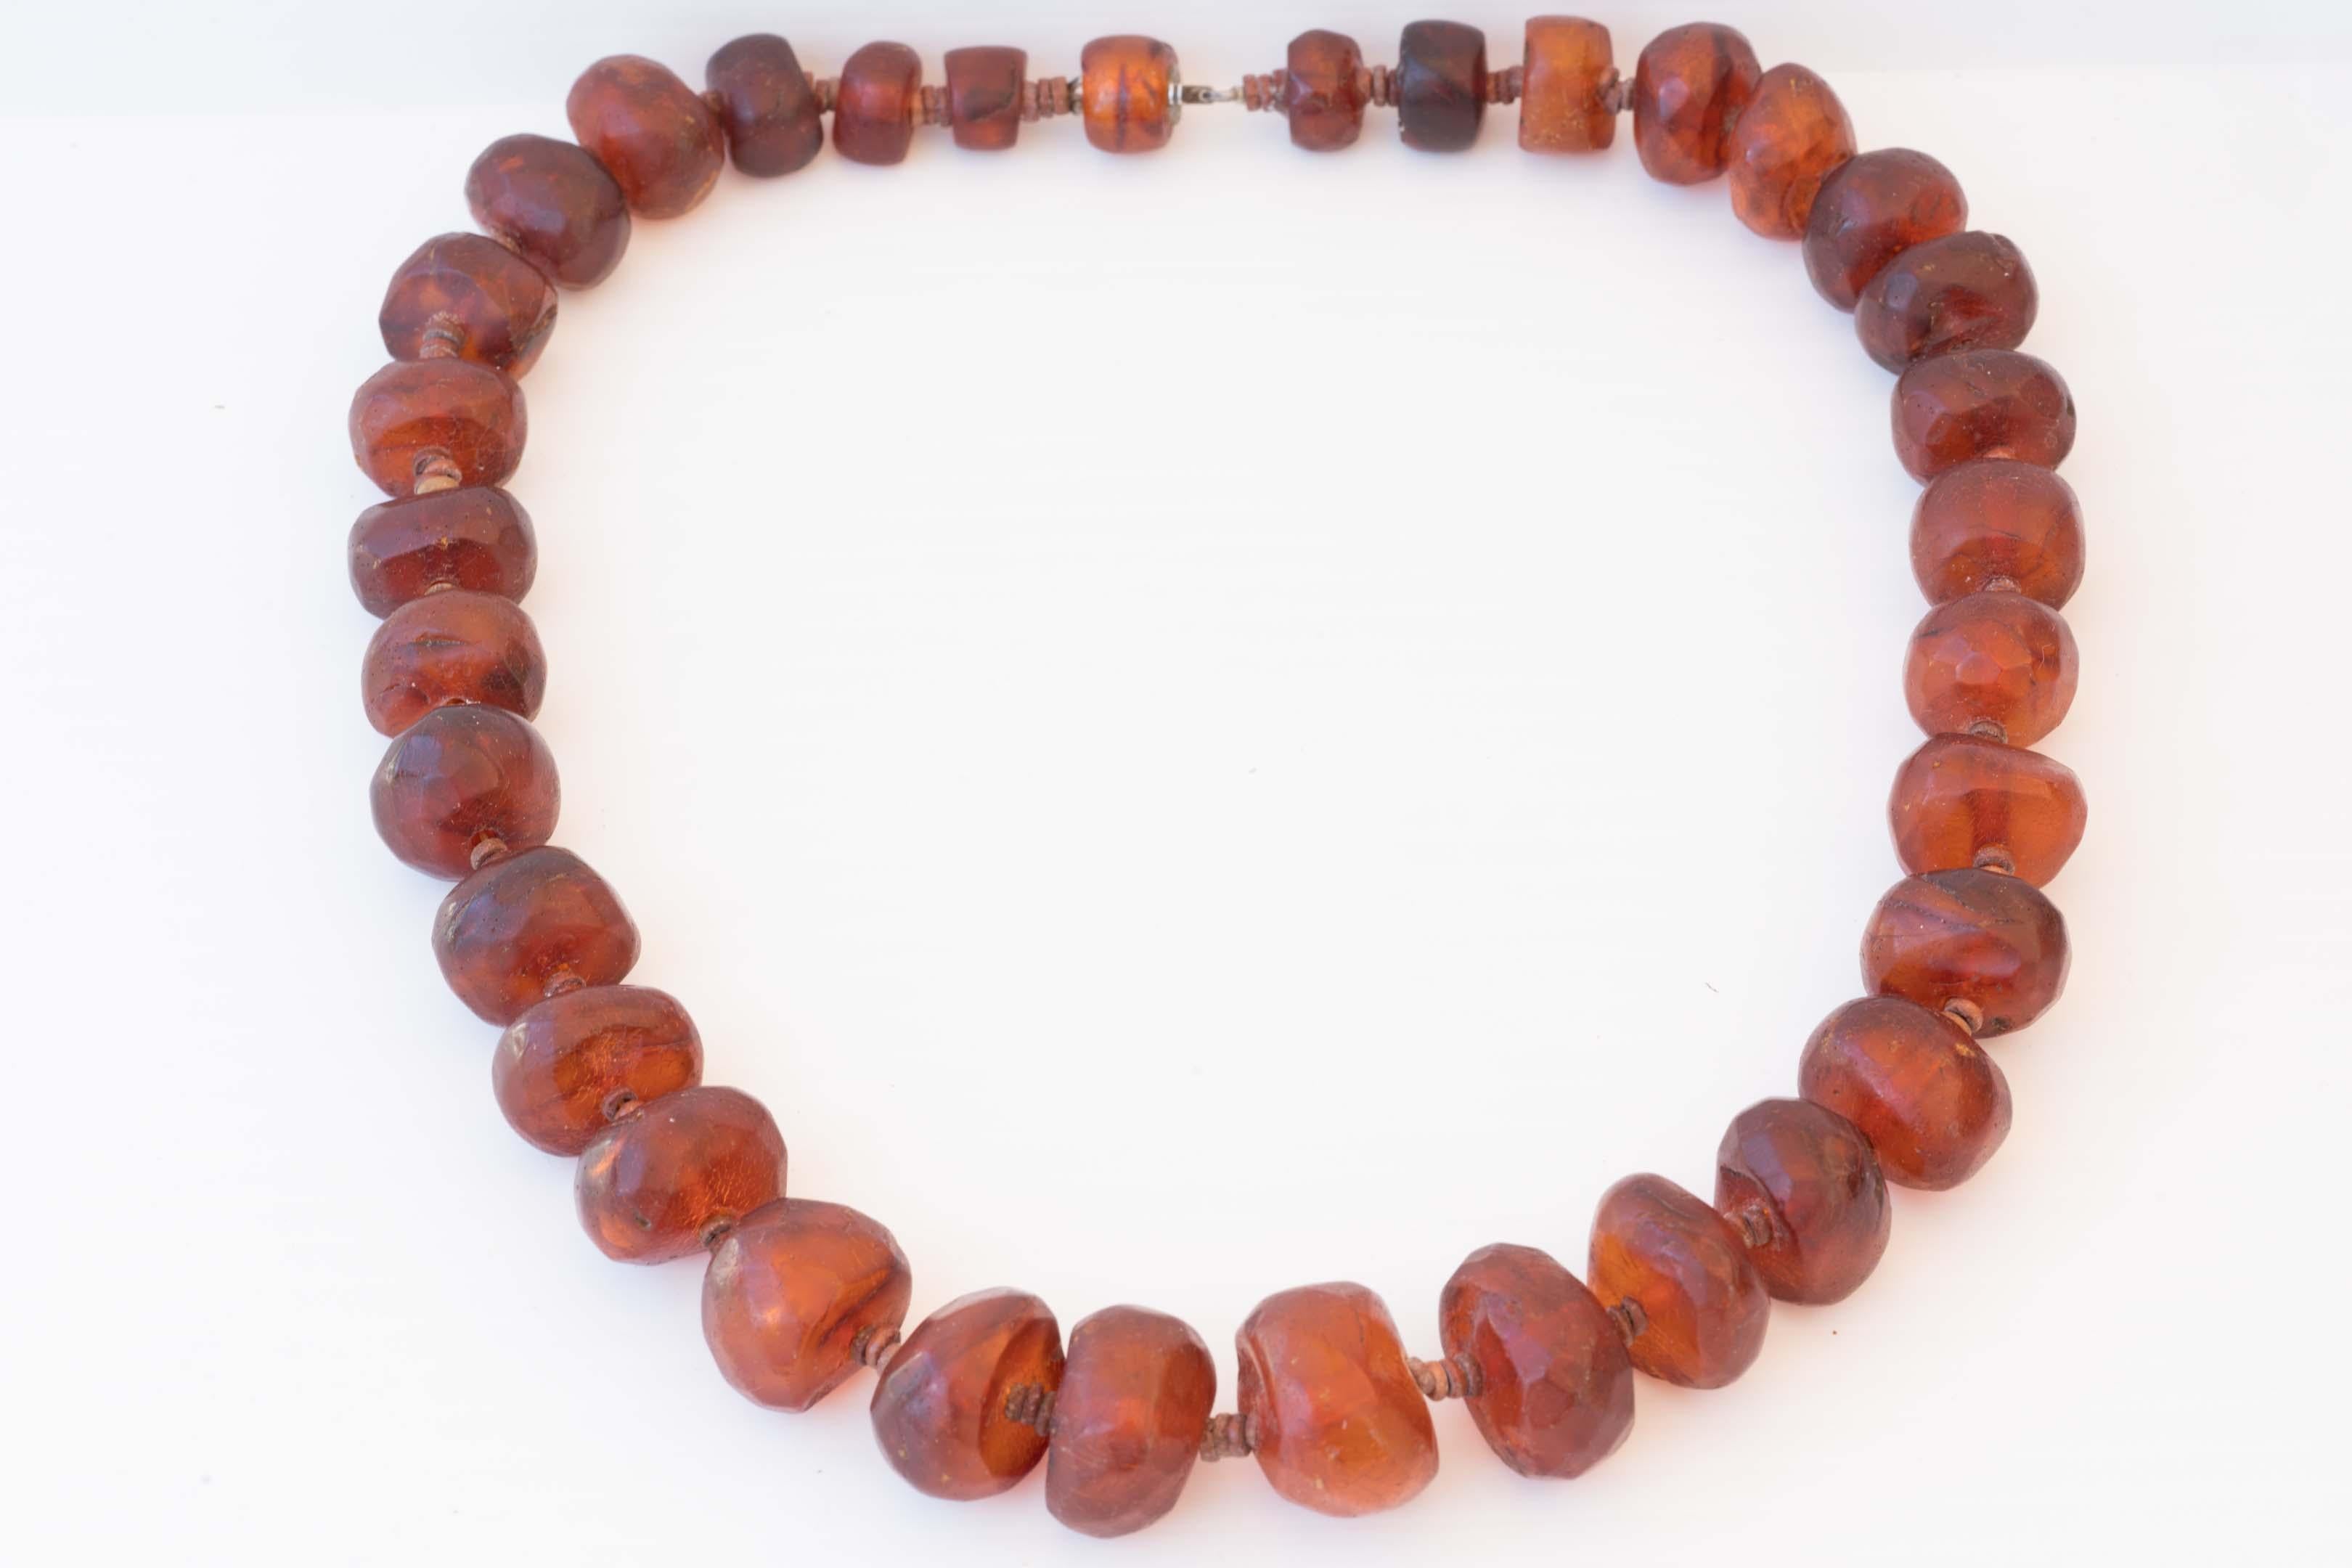 Bead Rare Burmite Amber Fossil Tribal Necklace from 19th Century For Sale